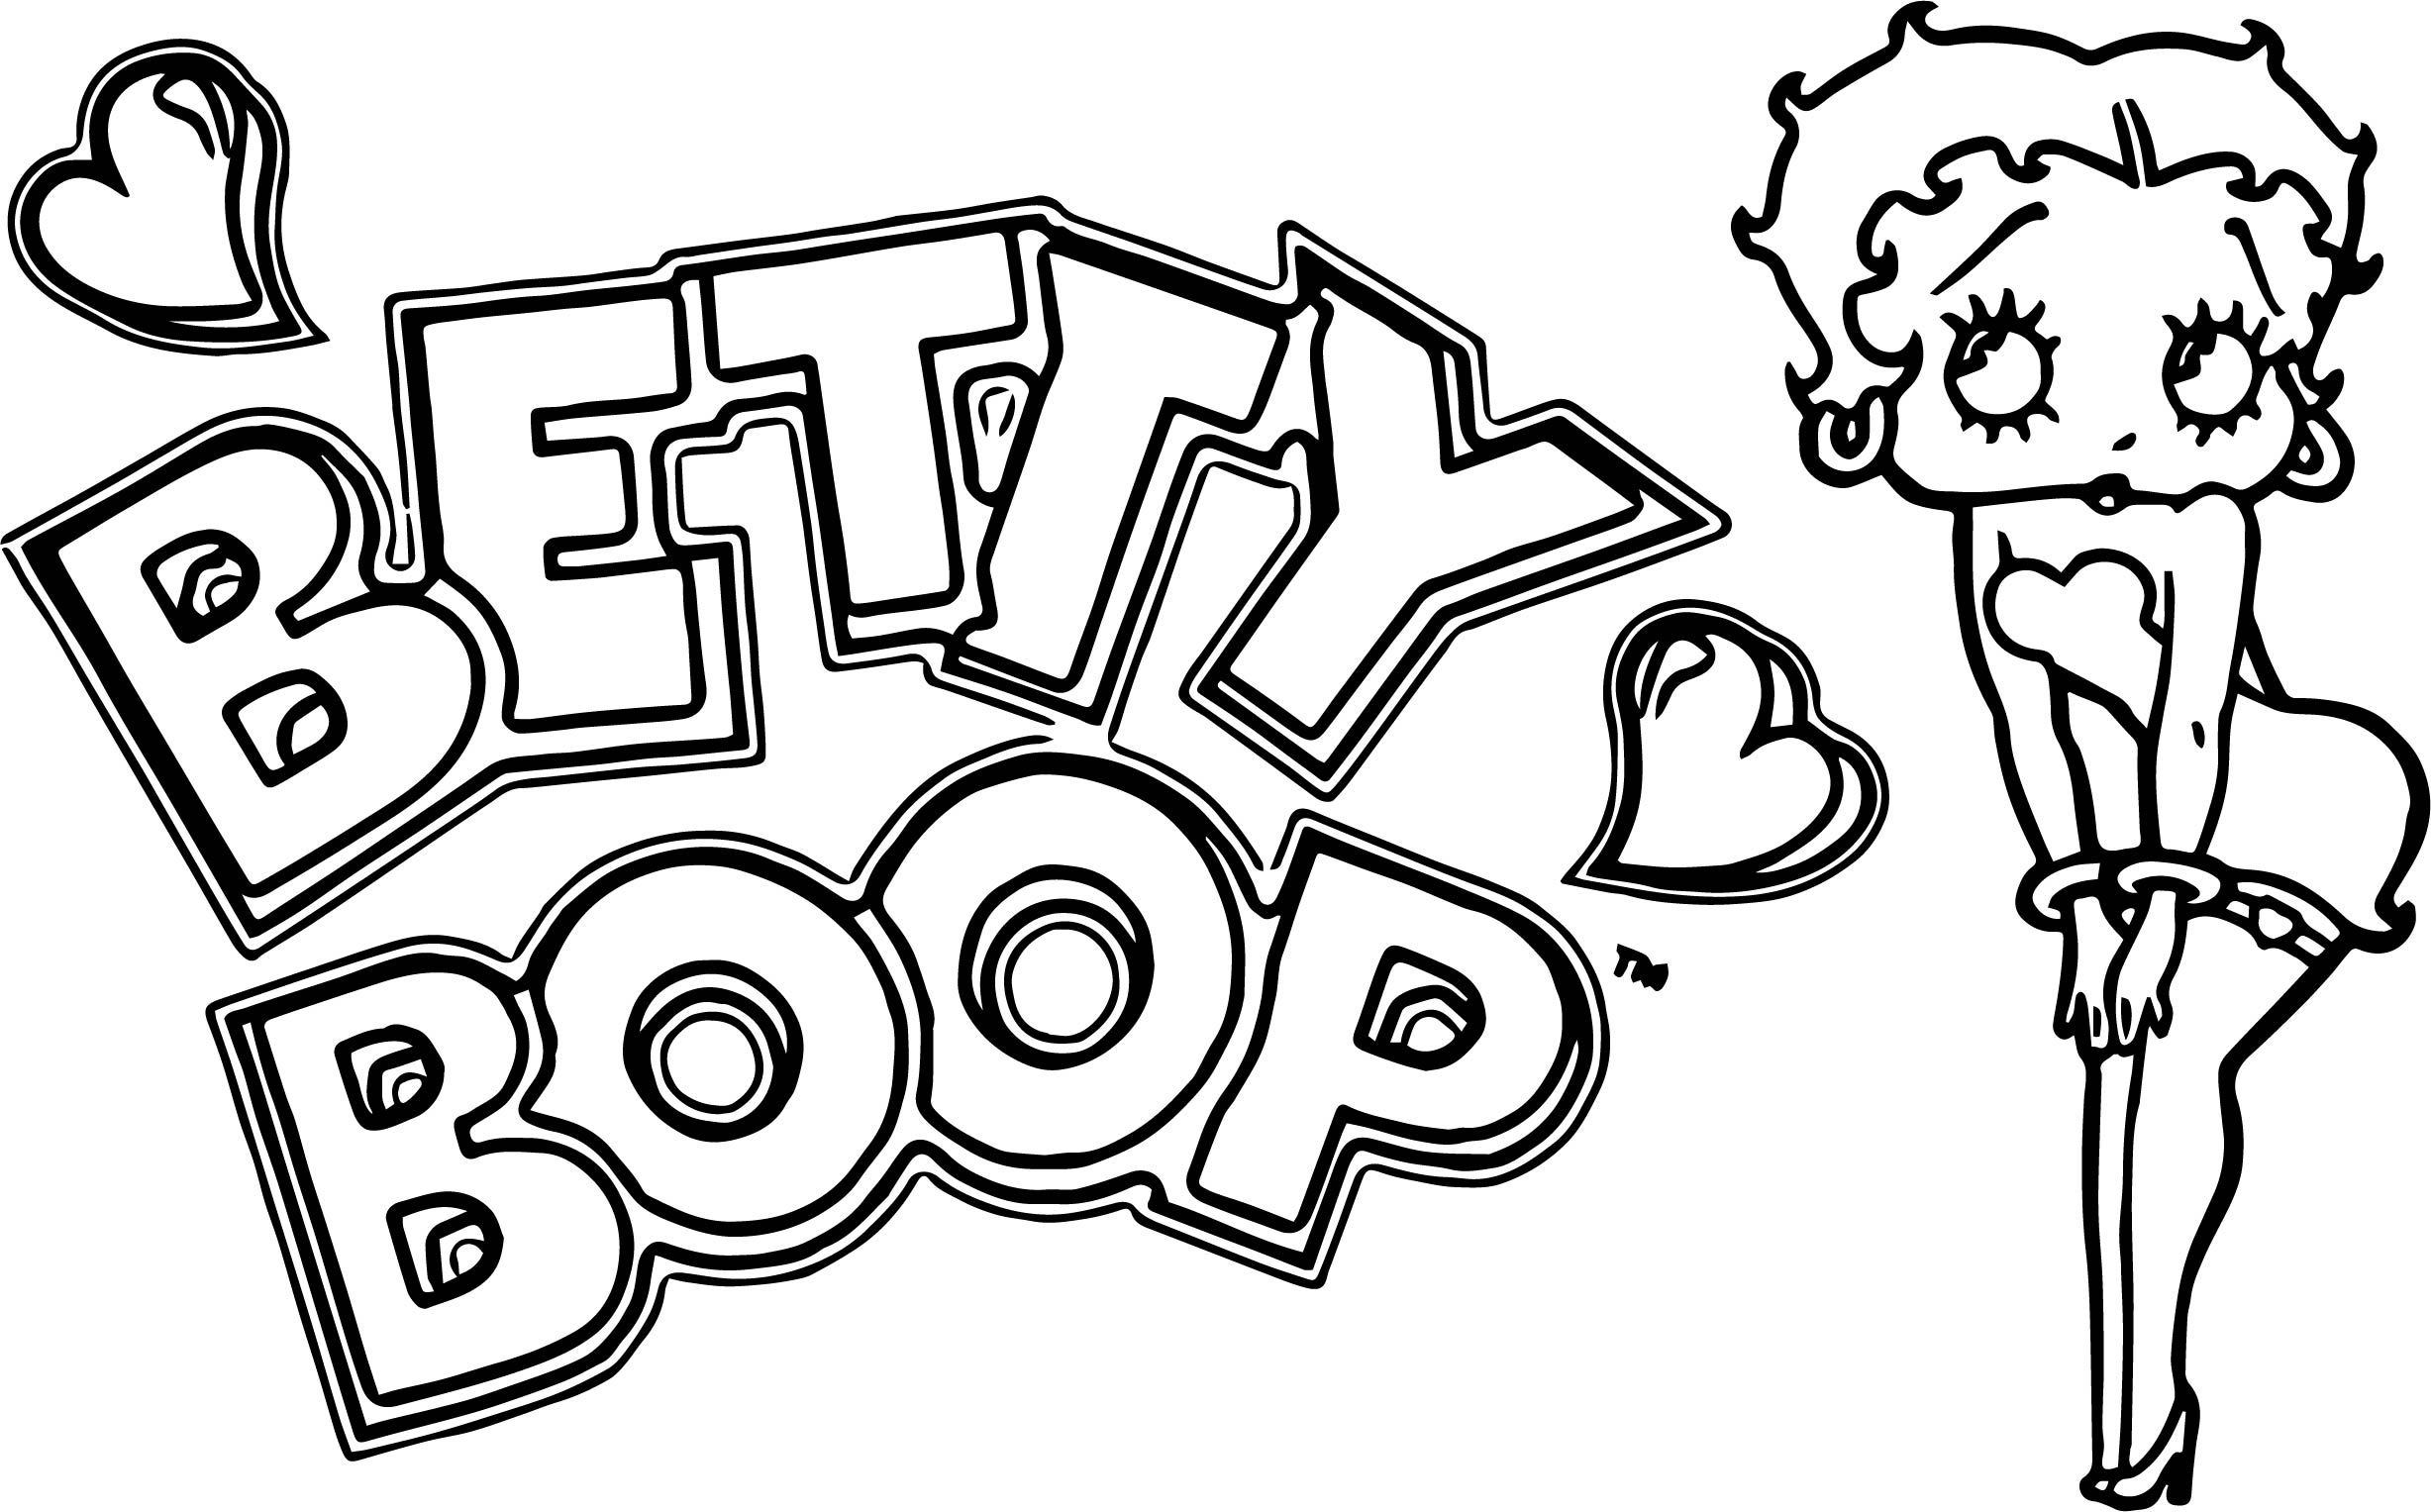 awesome Betty Boop Logo Coloring Page.